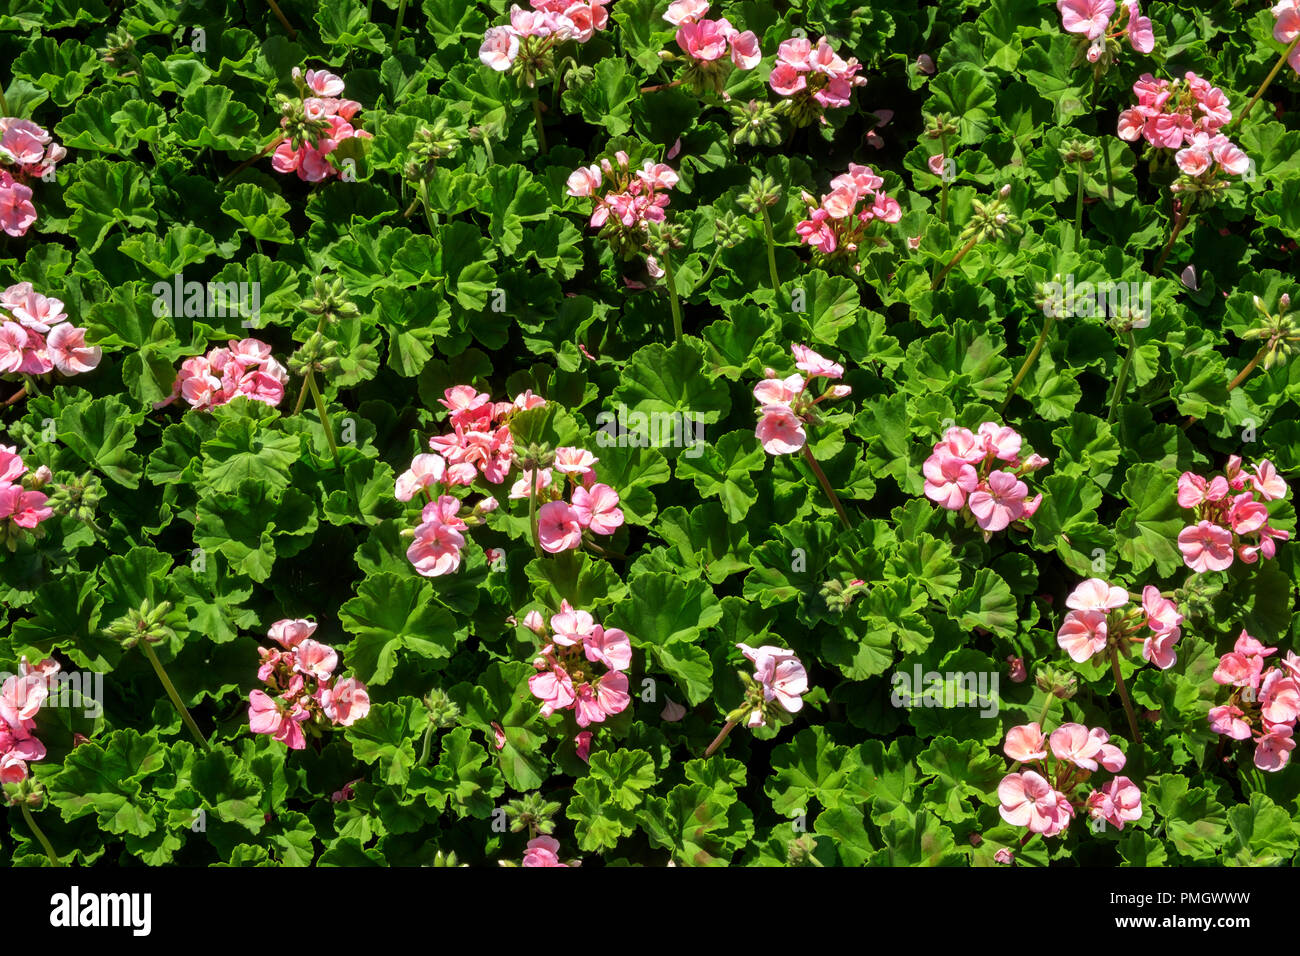 Full frame close up background of a summer flower bedding display Stock Photo